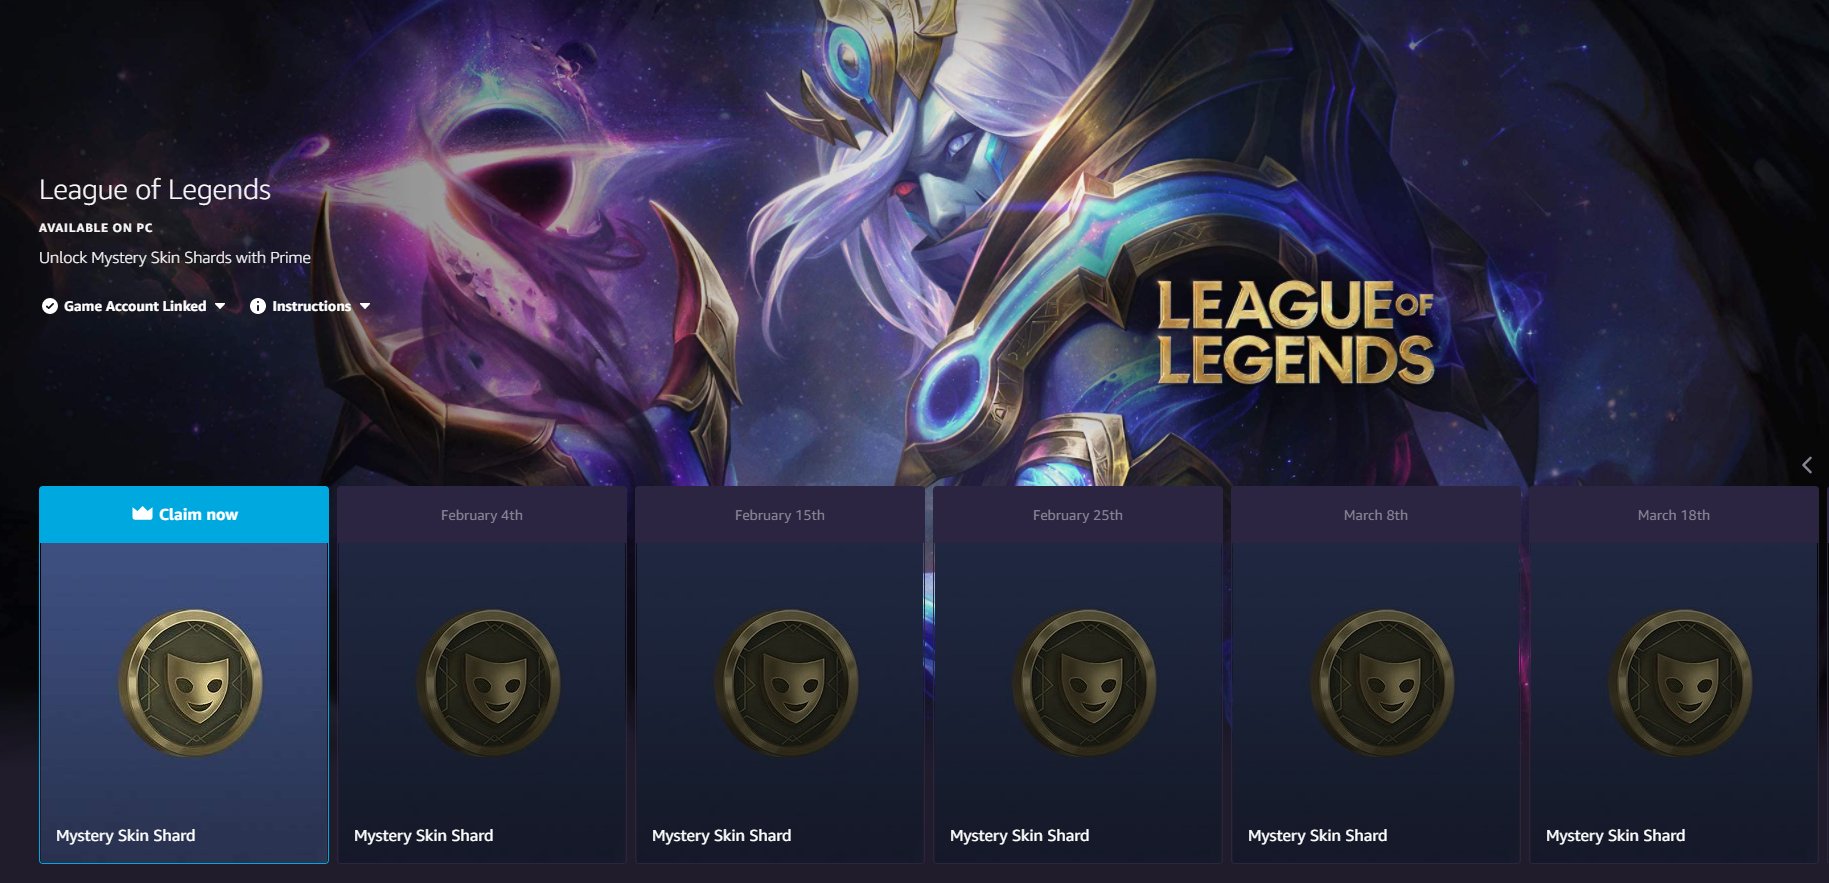 moobeat on "A new LoL Mystery is now available from Prime Gaming! https://t.co/0yXOeGHgHx" / Twitter